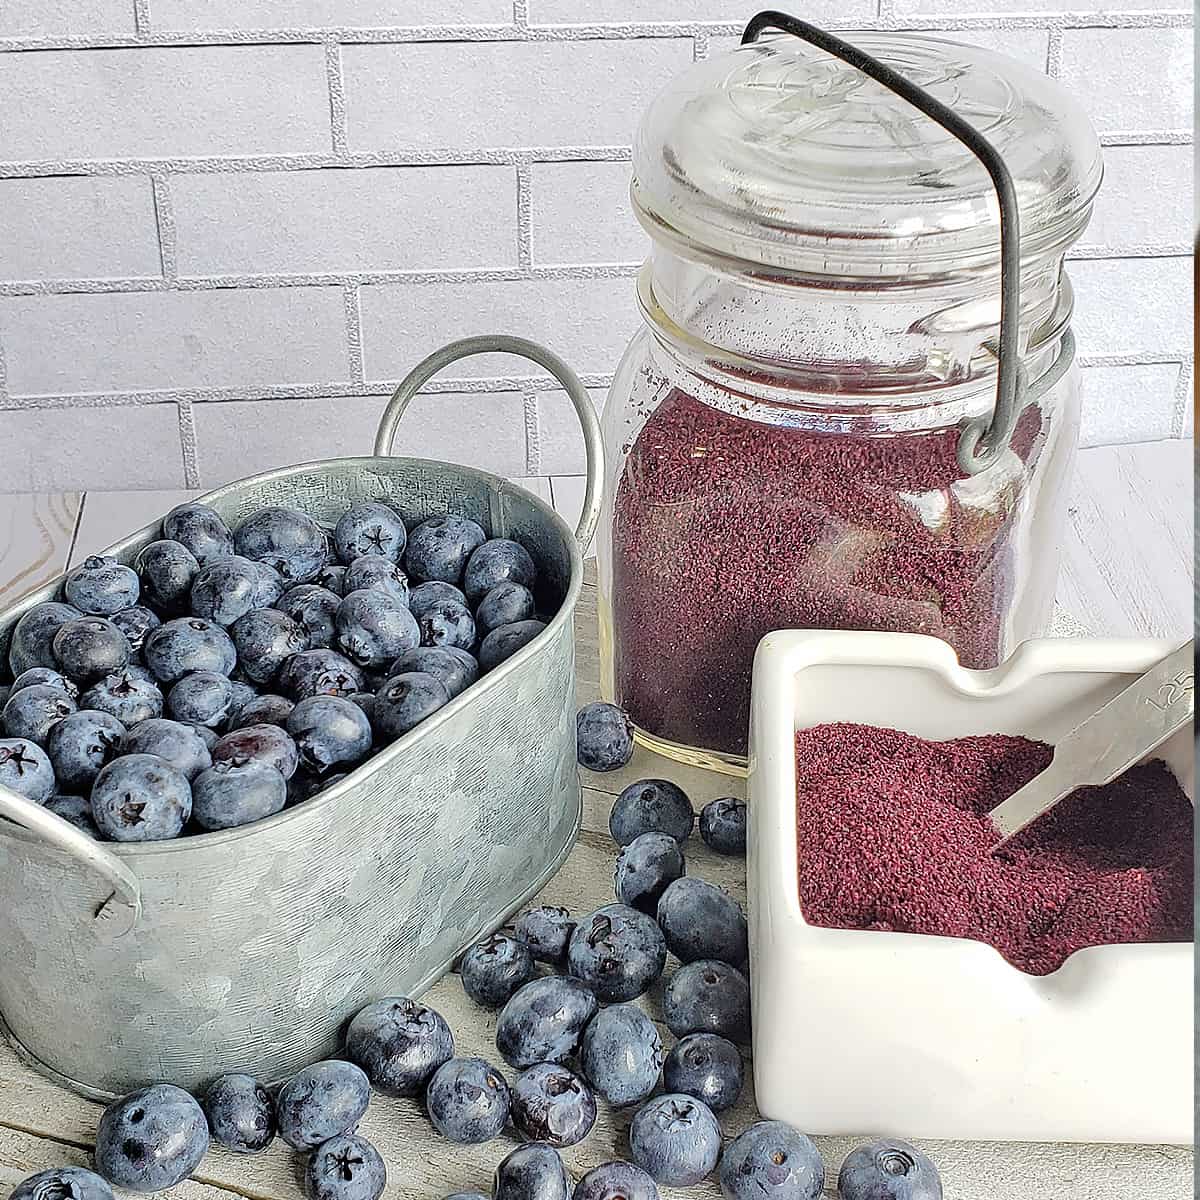 How to Dehydrate Blueberries & Make Blueberry Powder